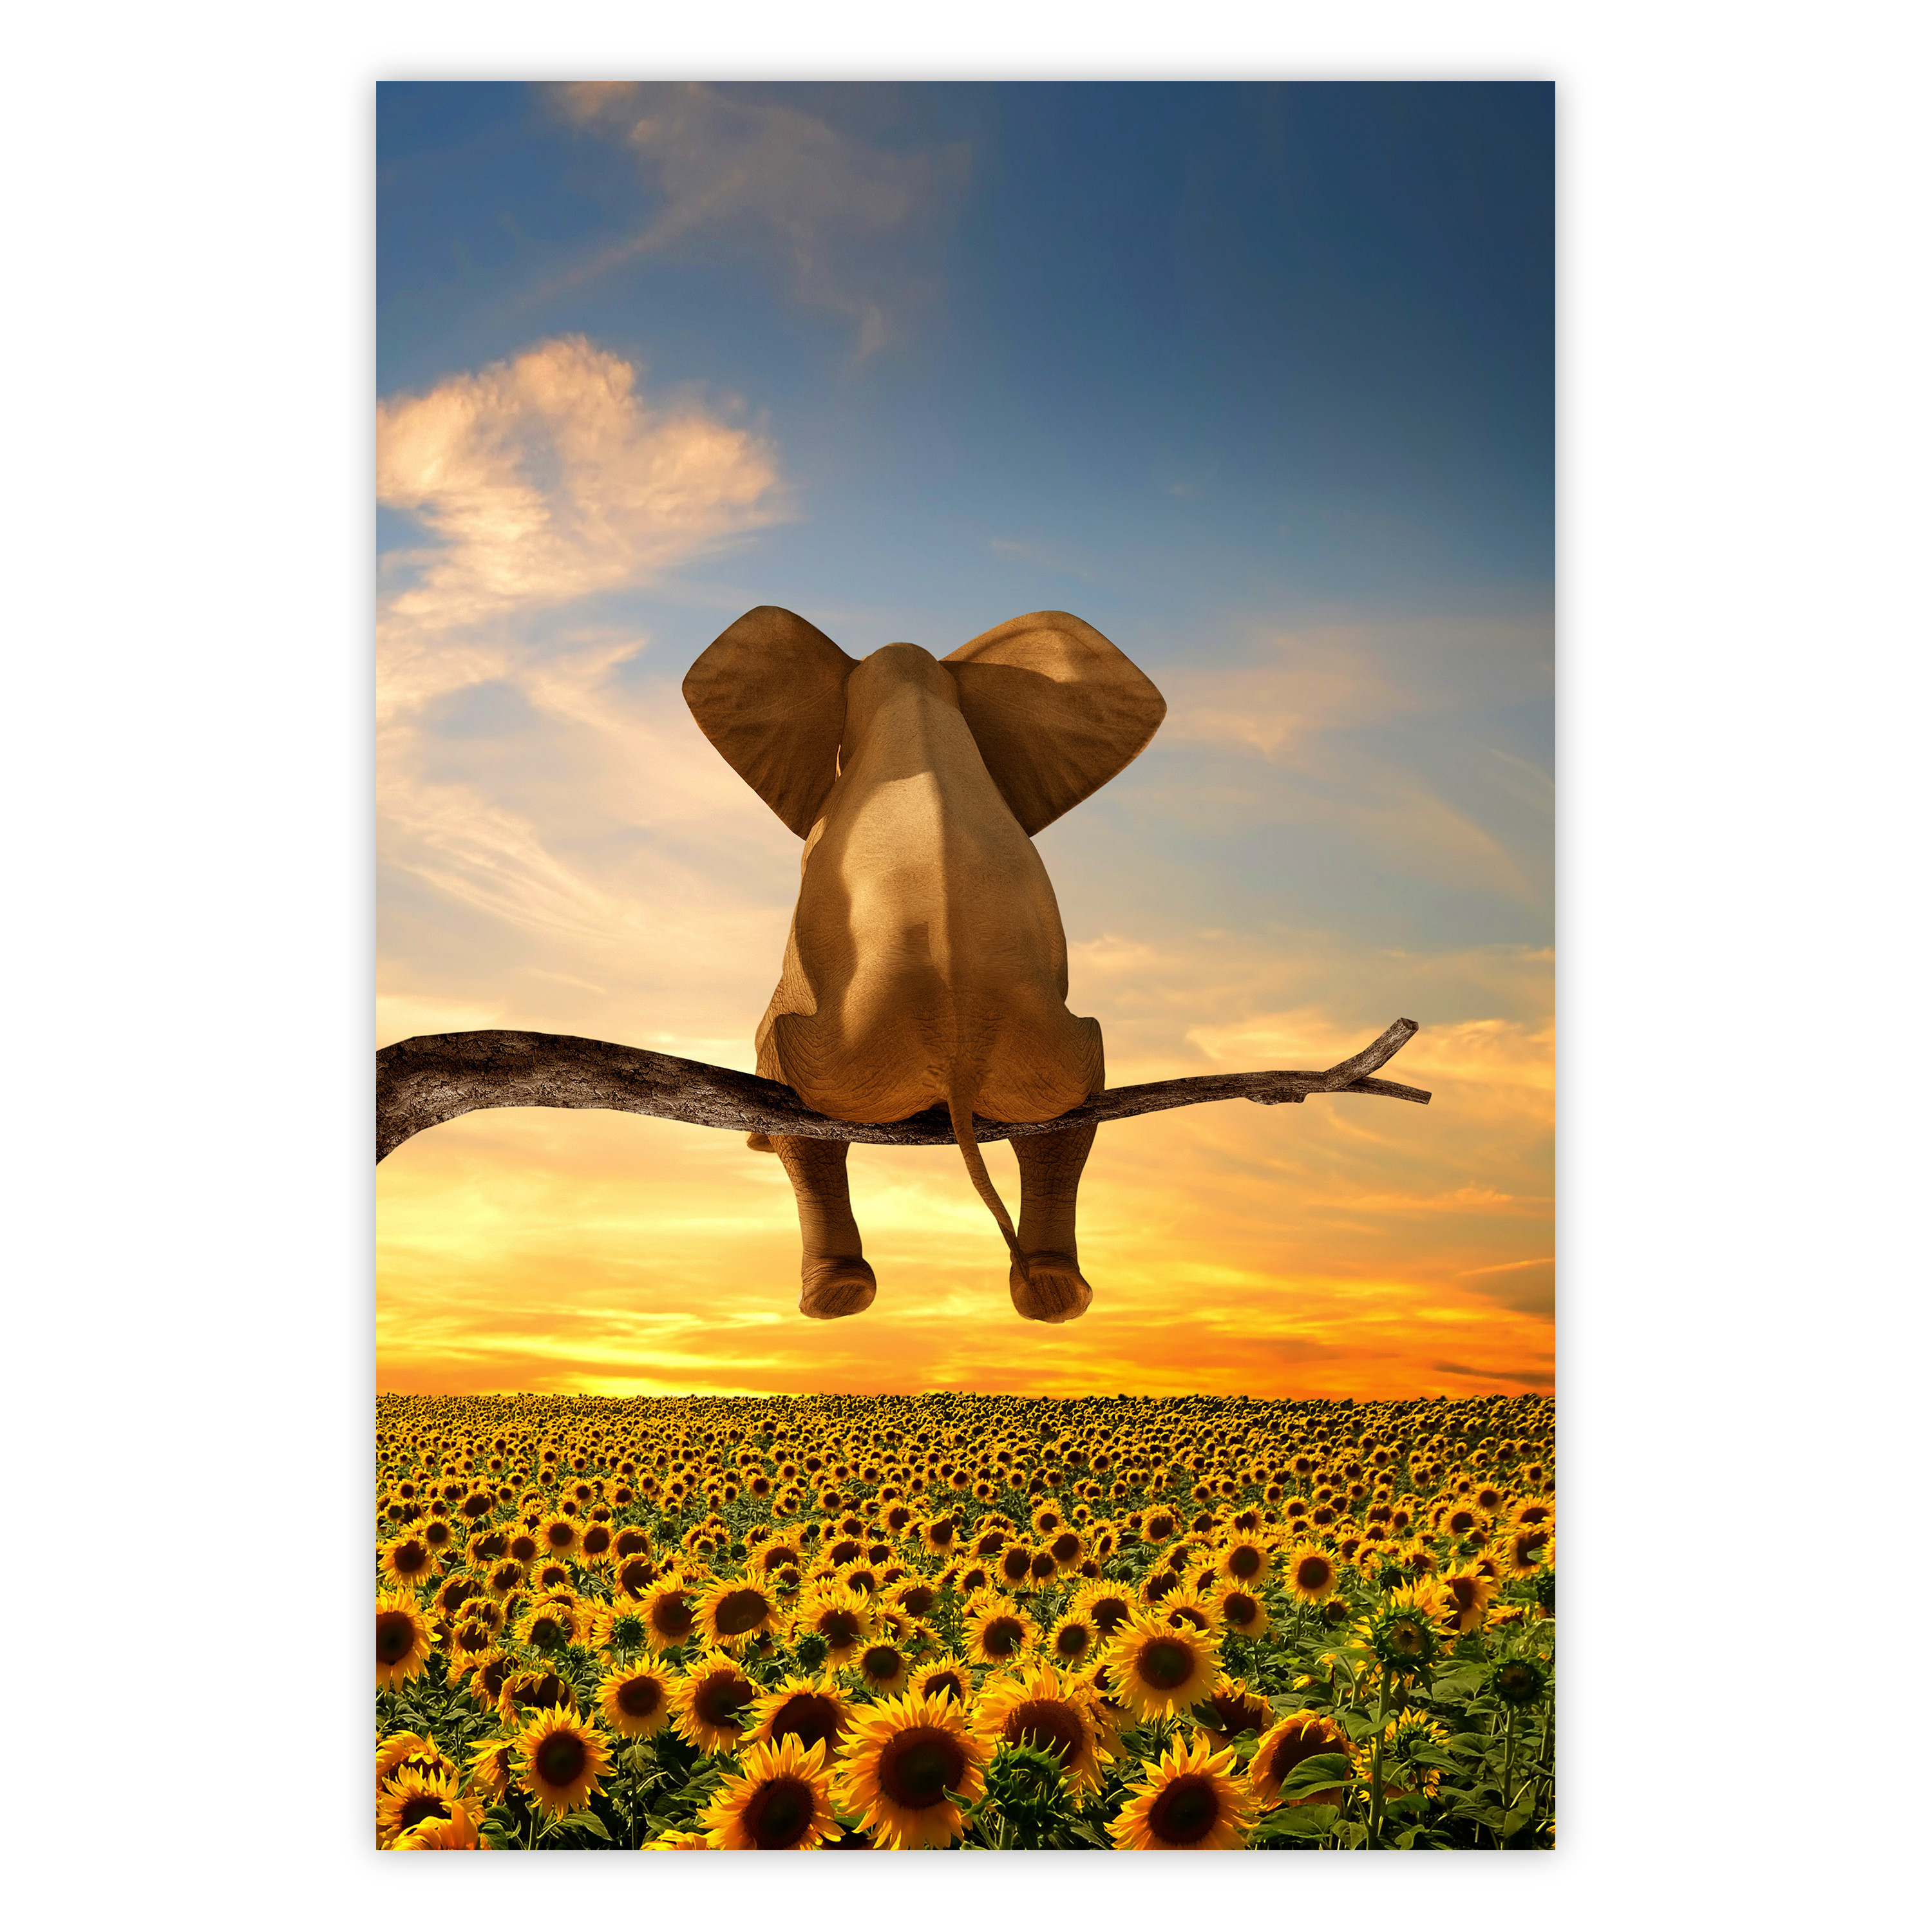 Elephant [Poster] Wandposter - and Sunflowers Poster